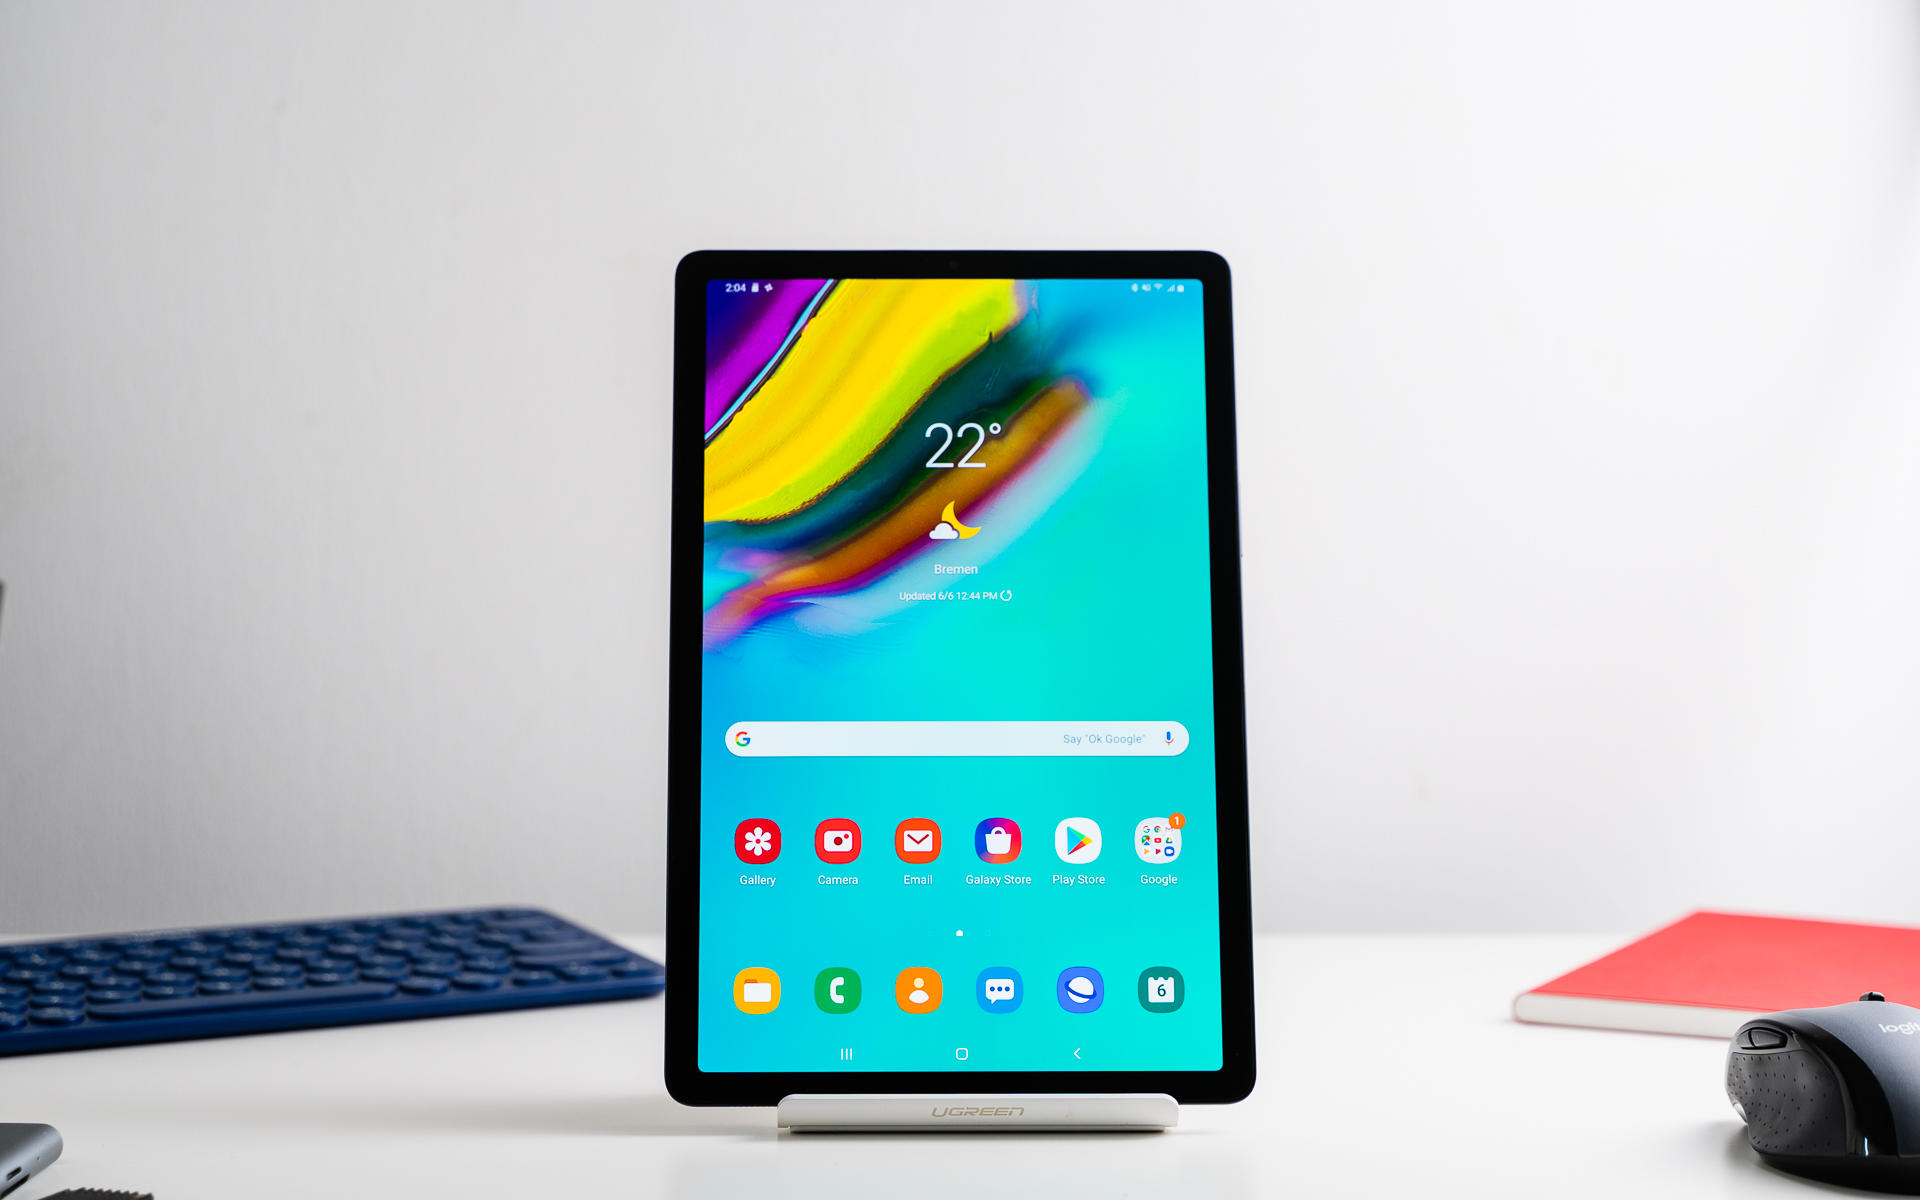 Review: Samsung Galaxy Tab S5e has slim design with warrior battery